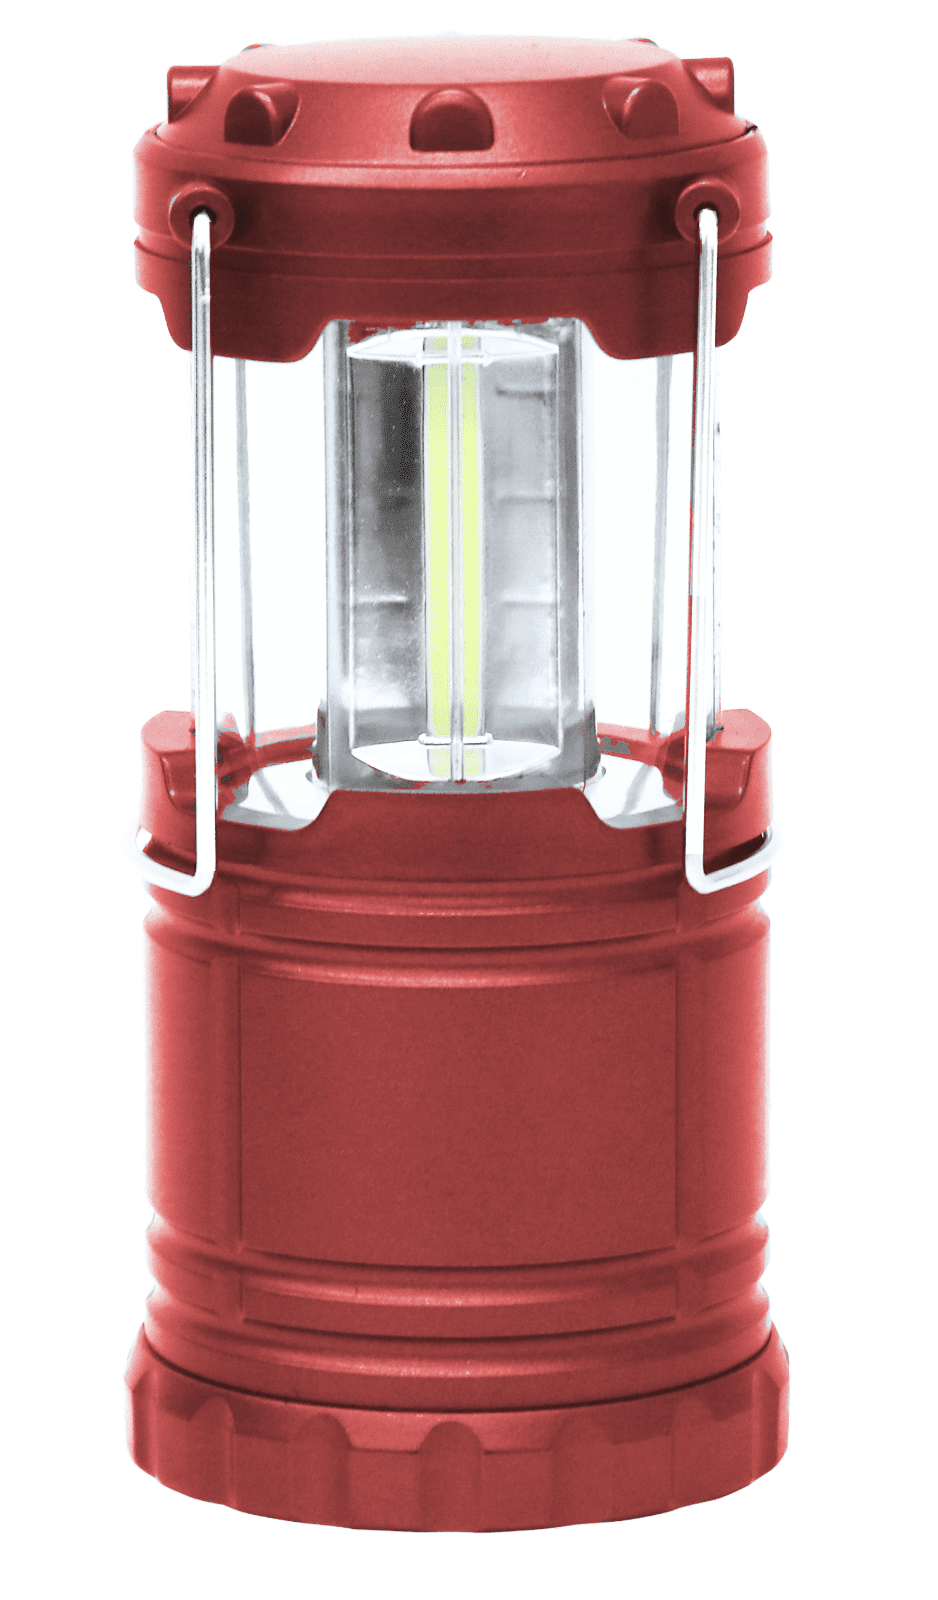 SUNLONG Camping Lantern,Portable Camping Lights,Battery Operated Lanterns  for Power Outages,Romantic Atmosphere Lamp for Party,Tents,Hiking (Red)